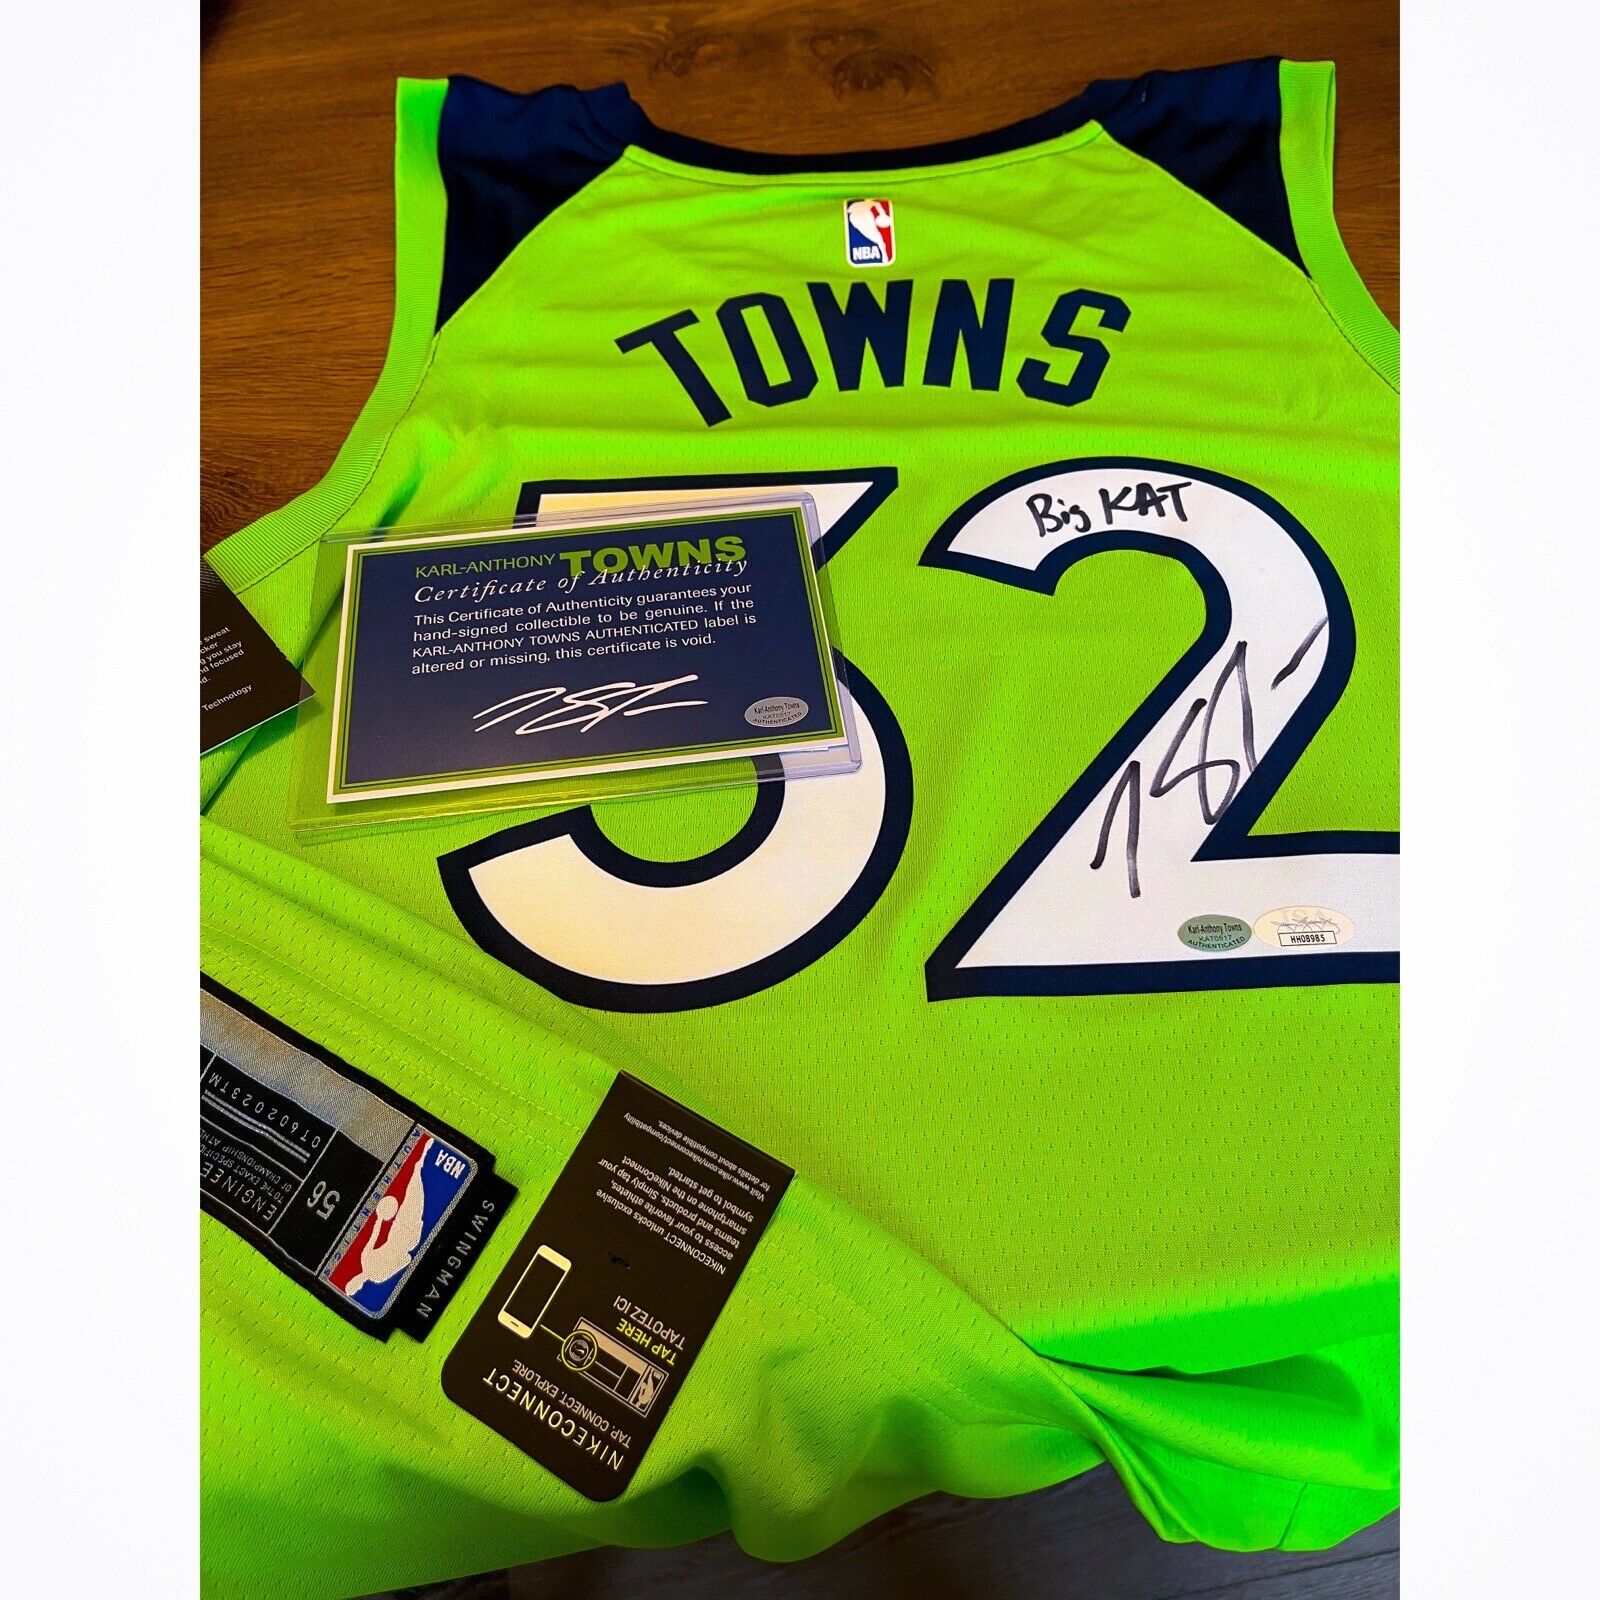 Karl Anthony Towns Signed & Inscribed Nike XL Swingman Jersey